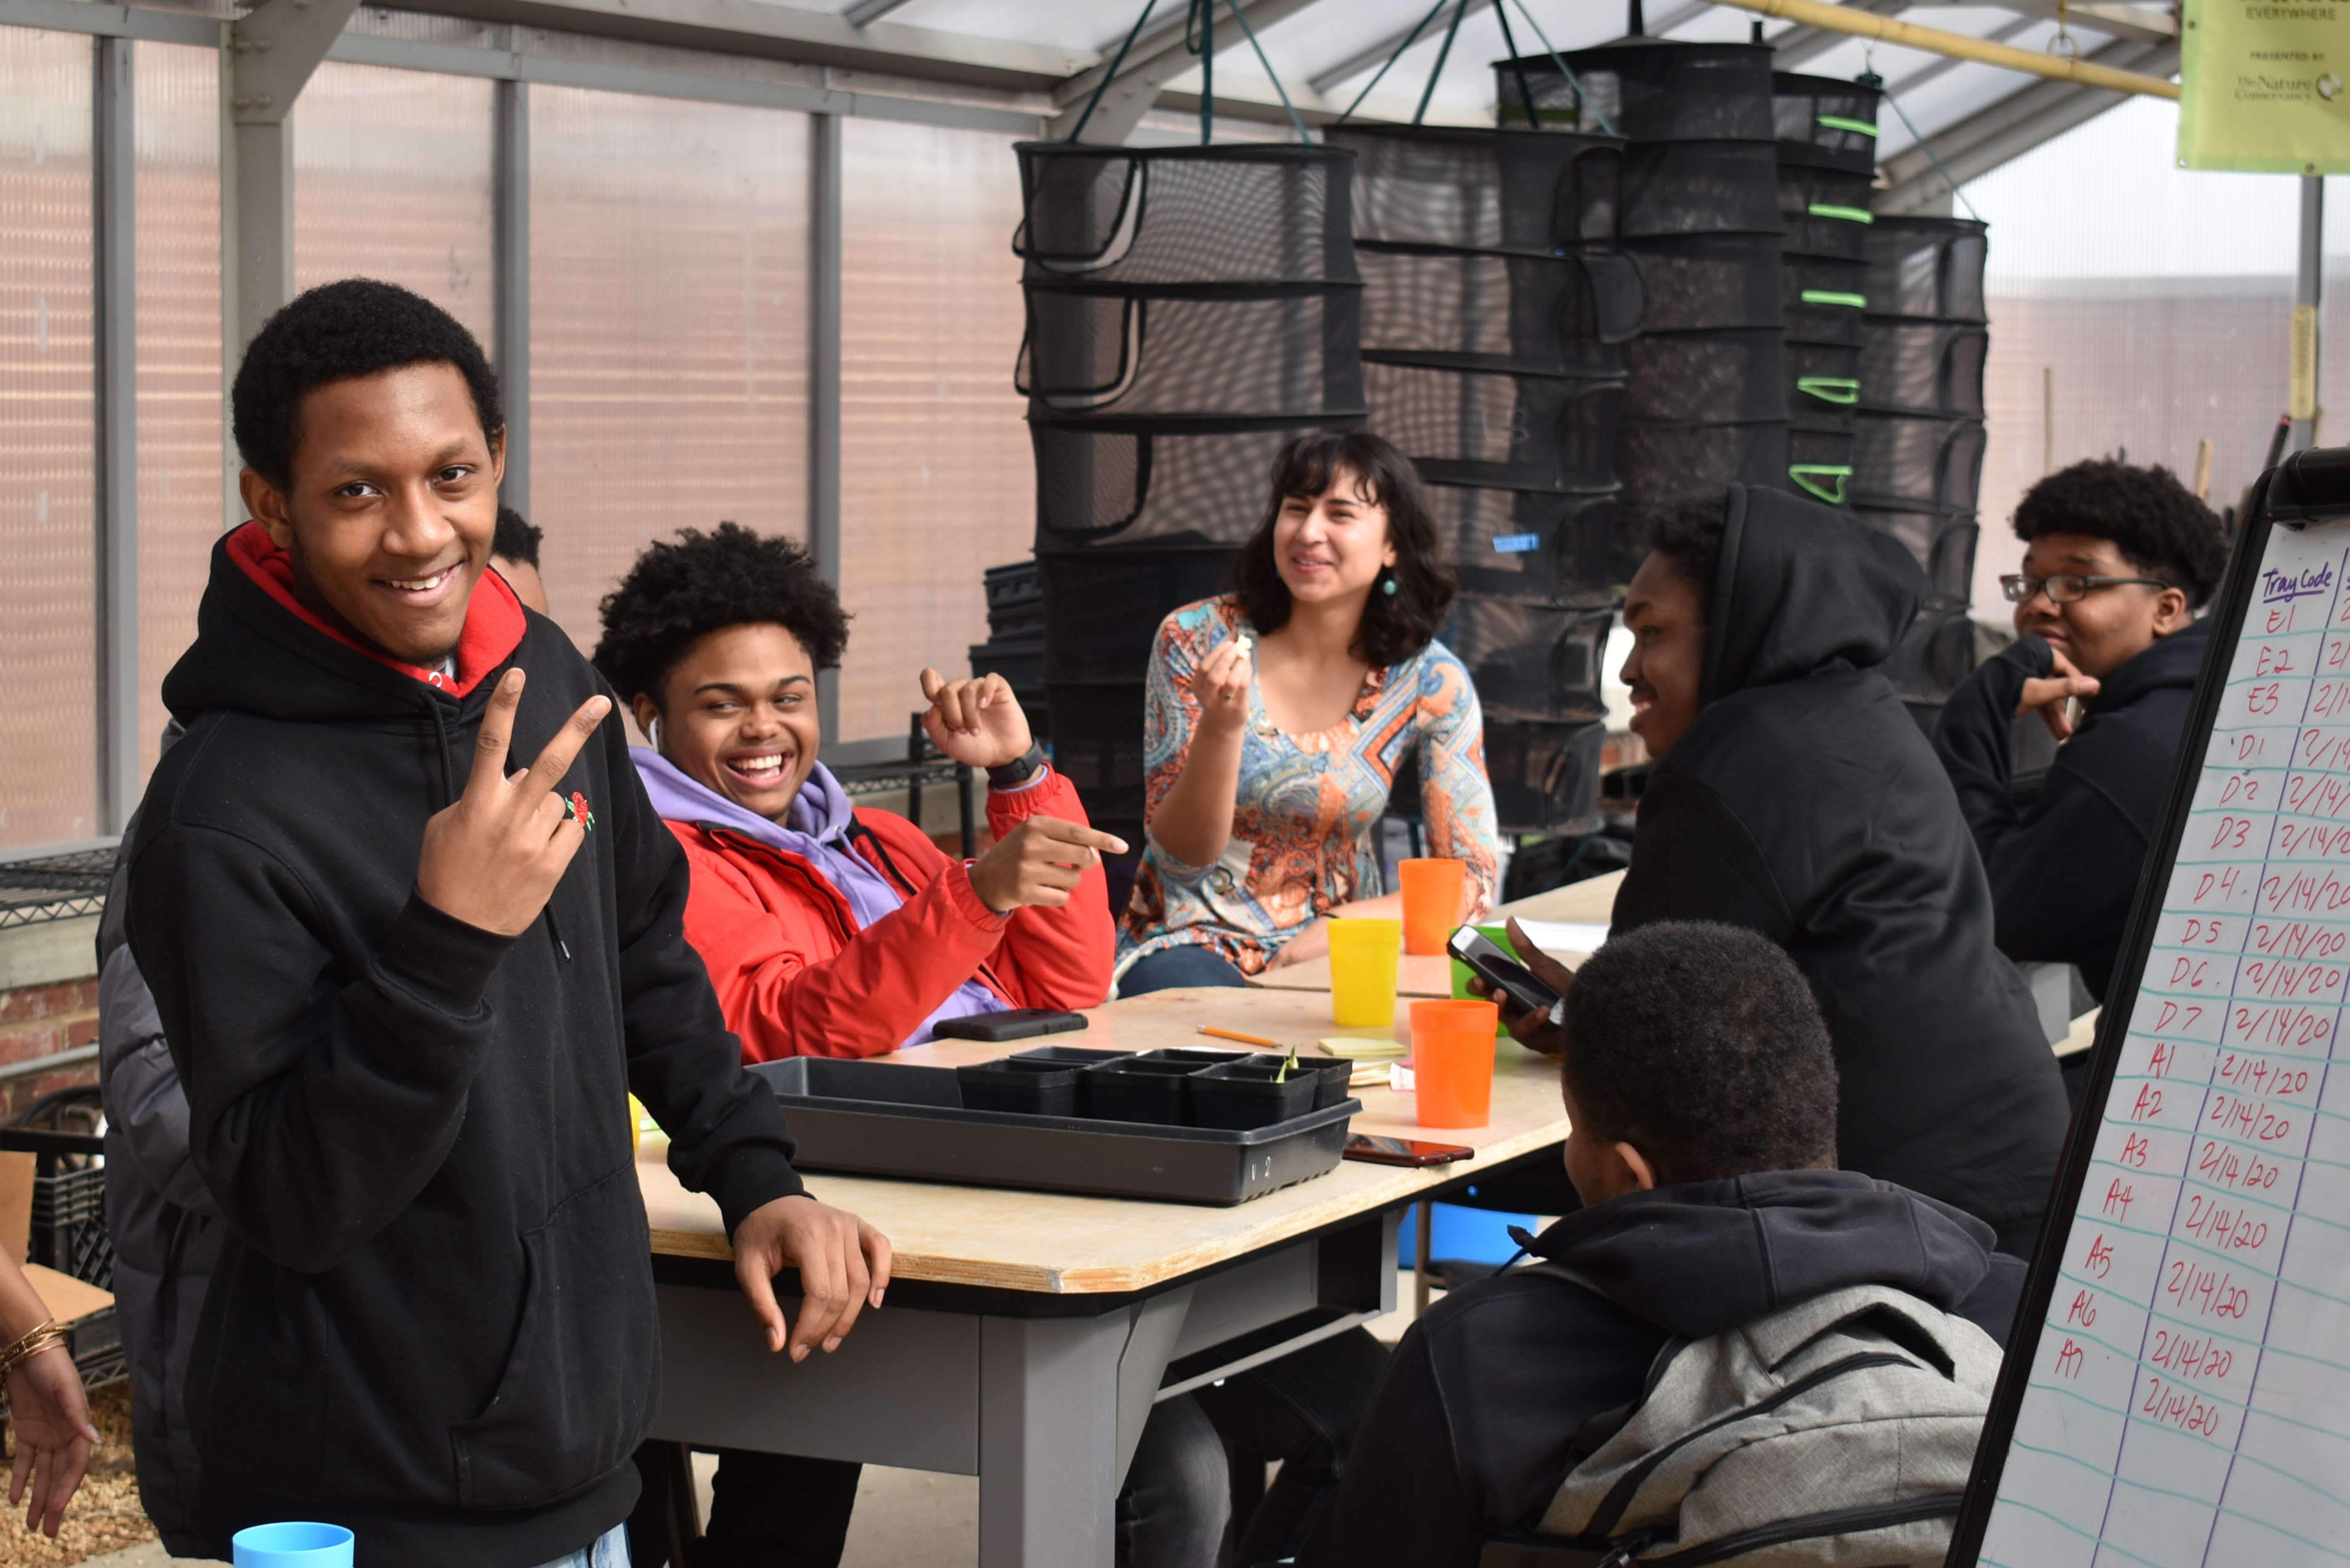 Mighty Greens Youth Staff smiling and chatting around a table during a team business meeting in a greenhouse